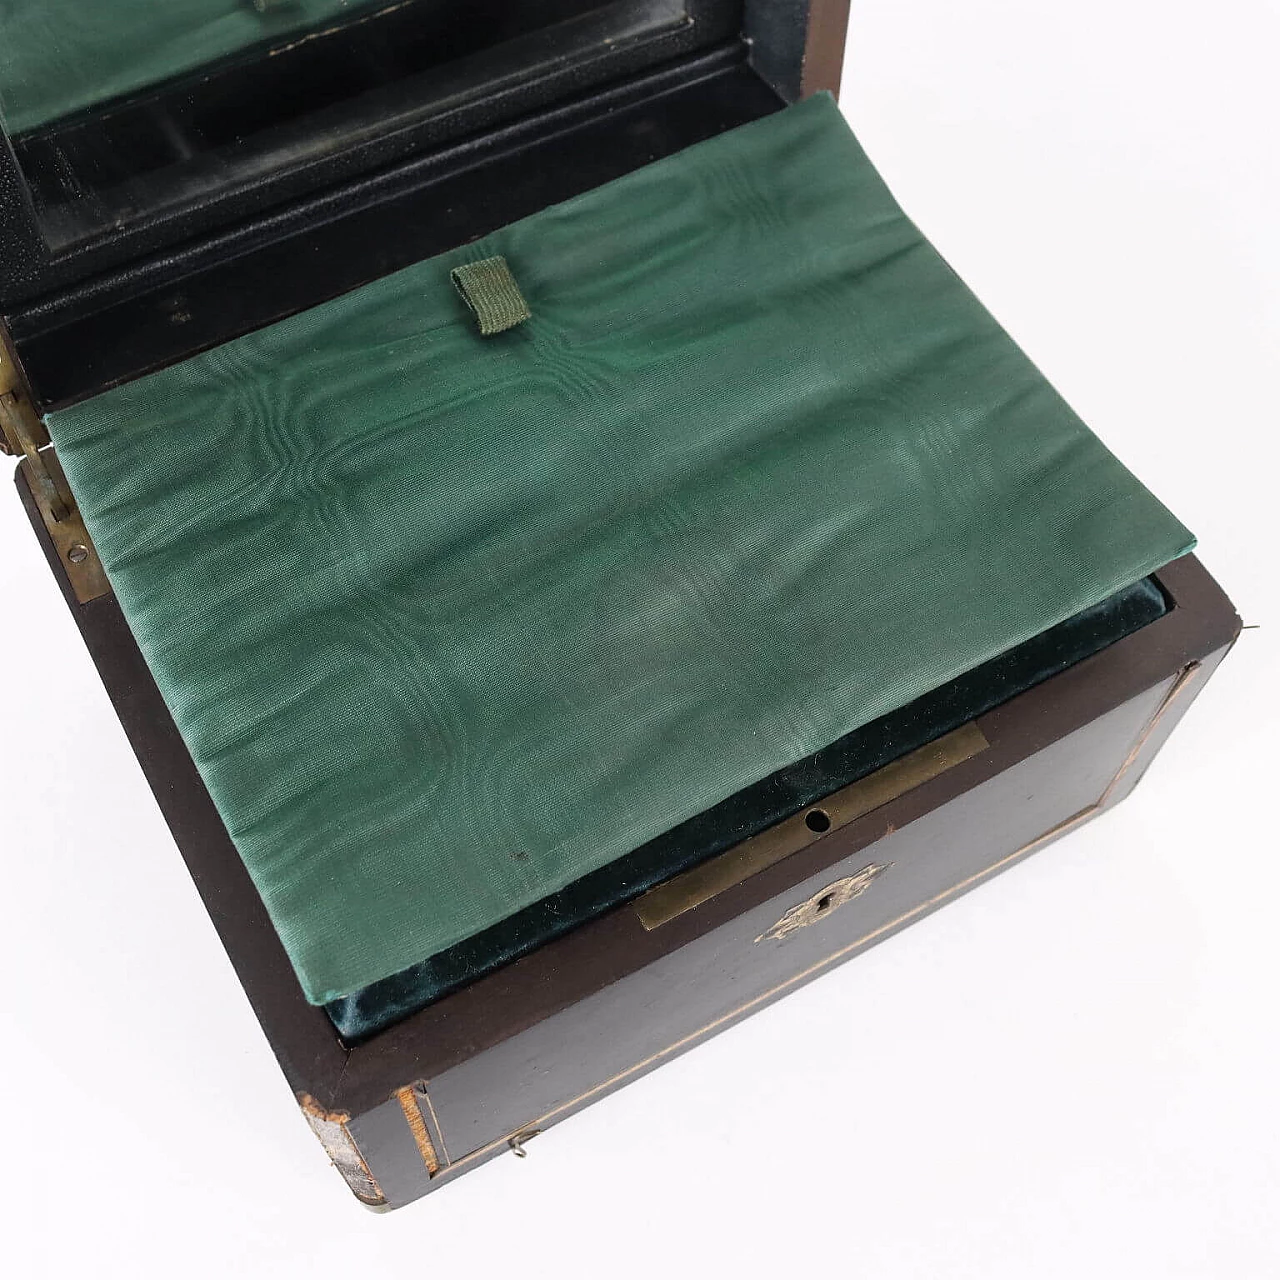 Ebony veneer sewing box with inlay and brass profiles, 19th century 14